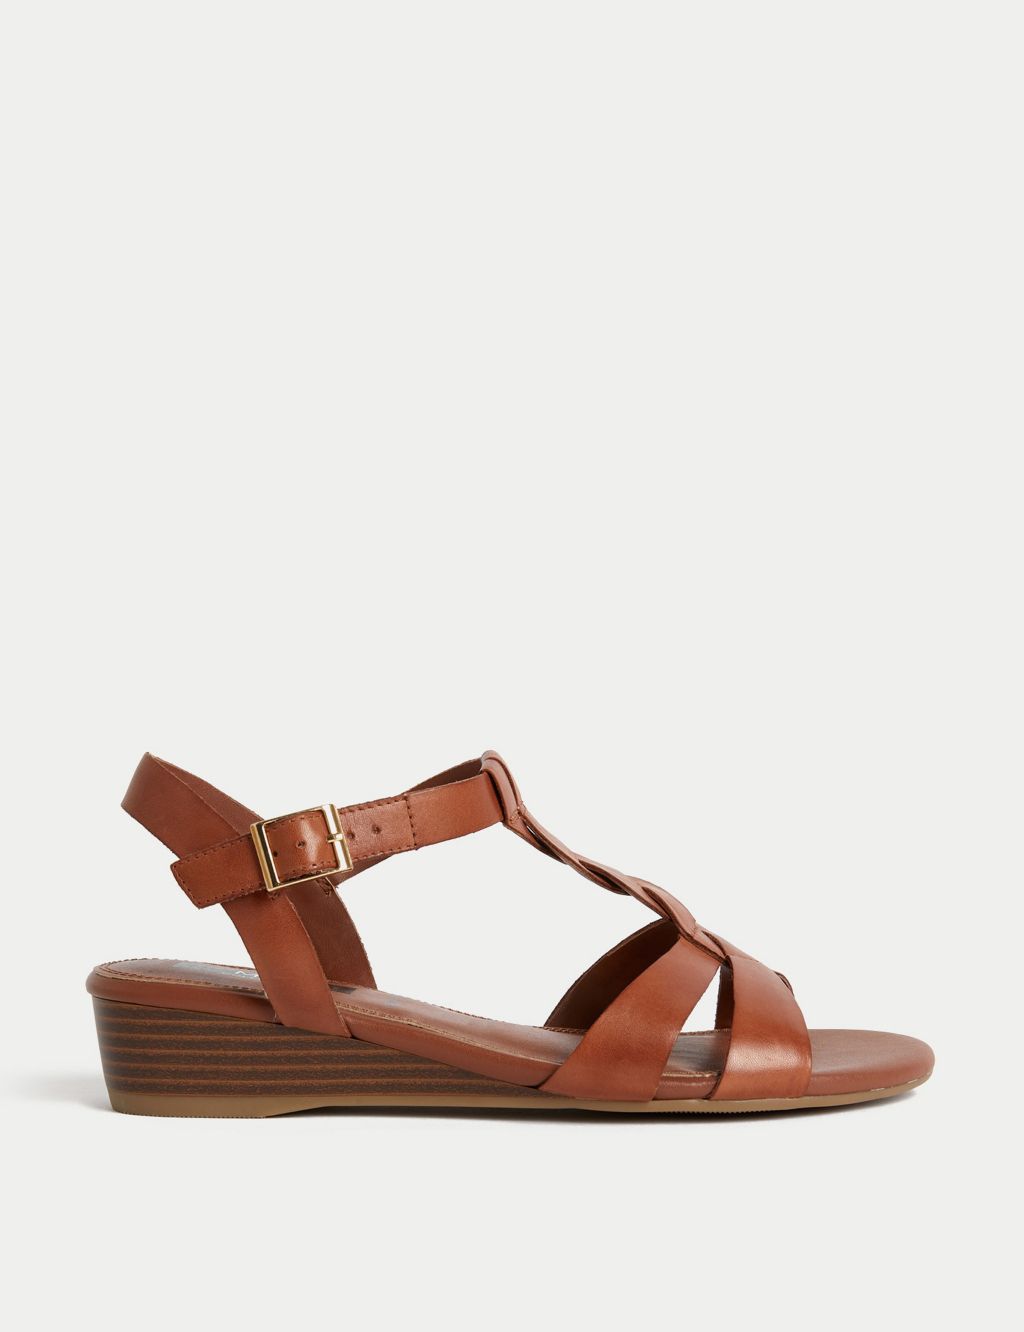 Wide Fit Leather Wedge Sandals image 1